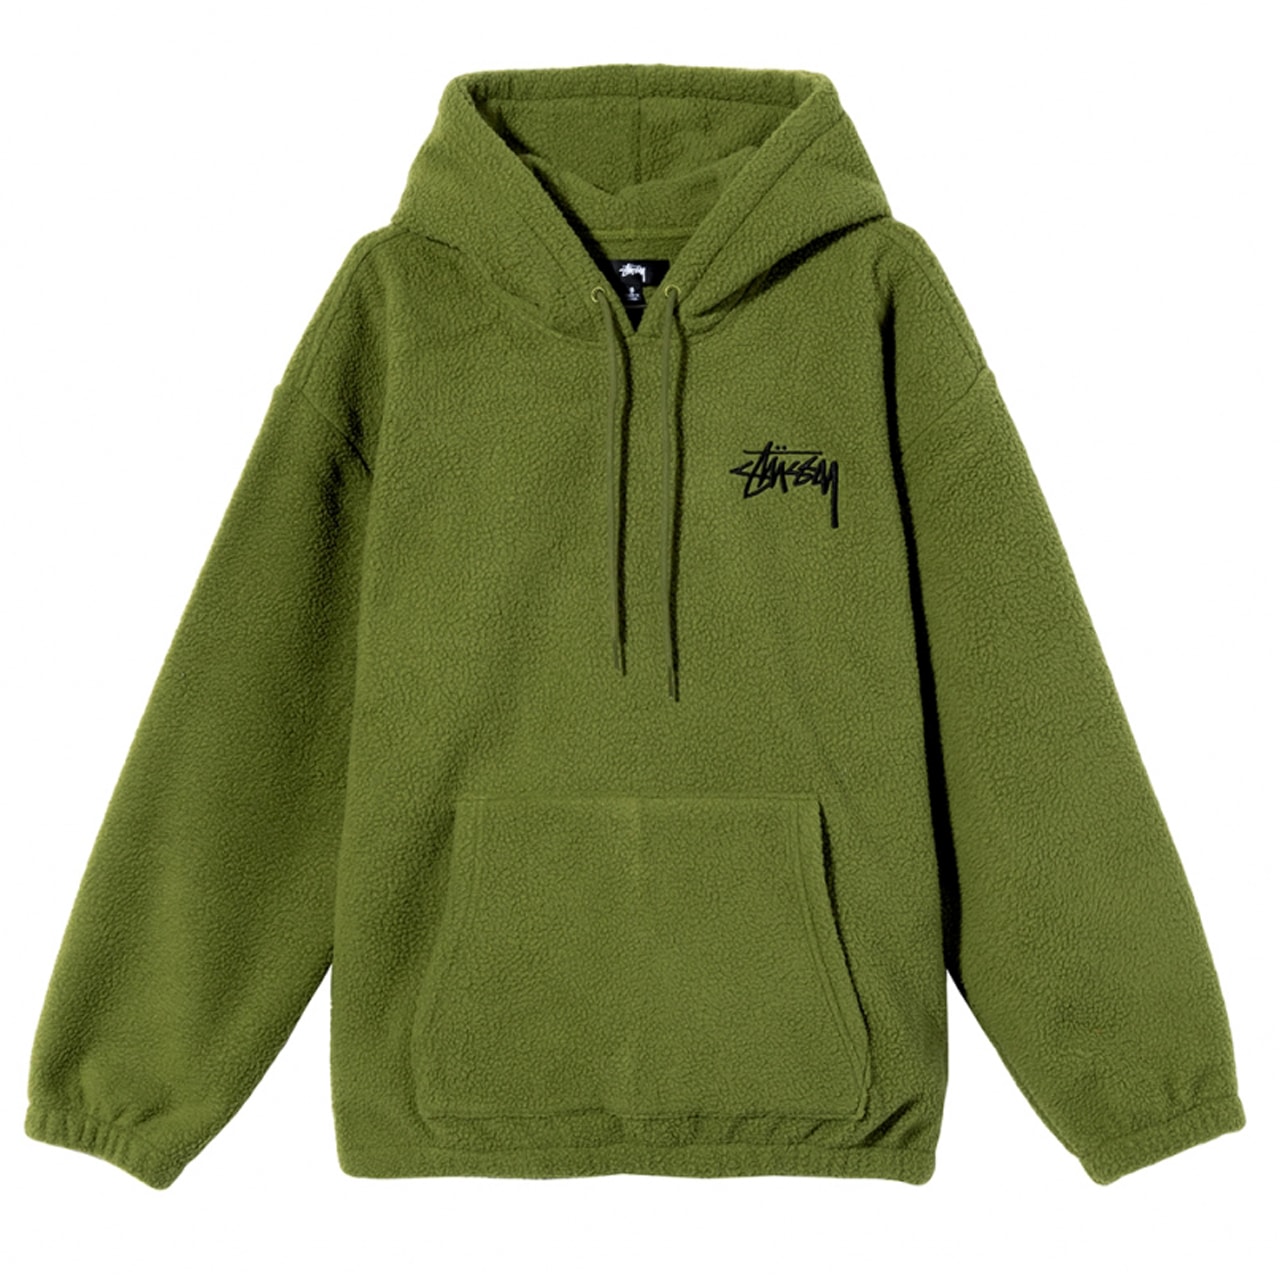 Stüssy Spring 2021 Collection Key Pieces, Textiles FABRICS pertex unlimited polar fleece hoodie track jacket suede workwear pants double knee